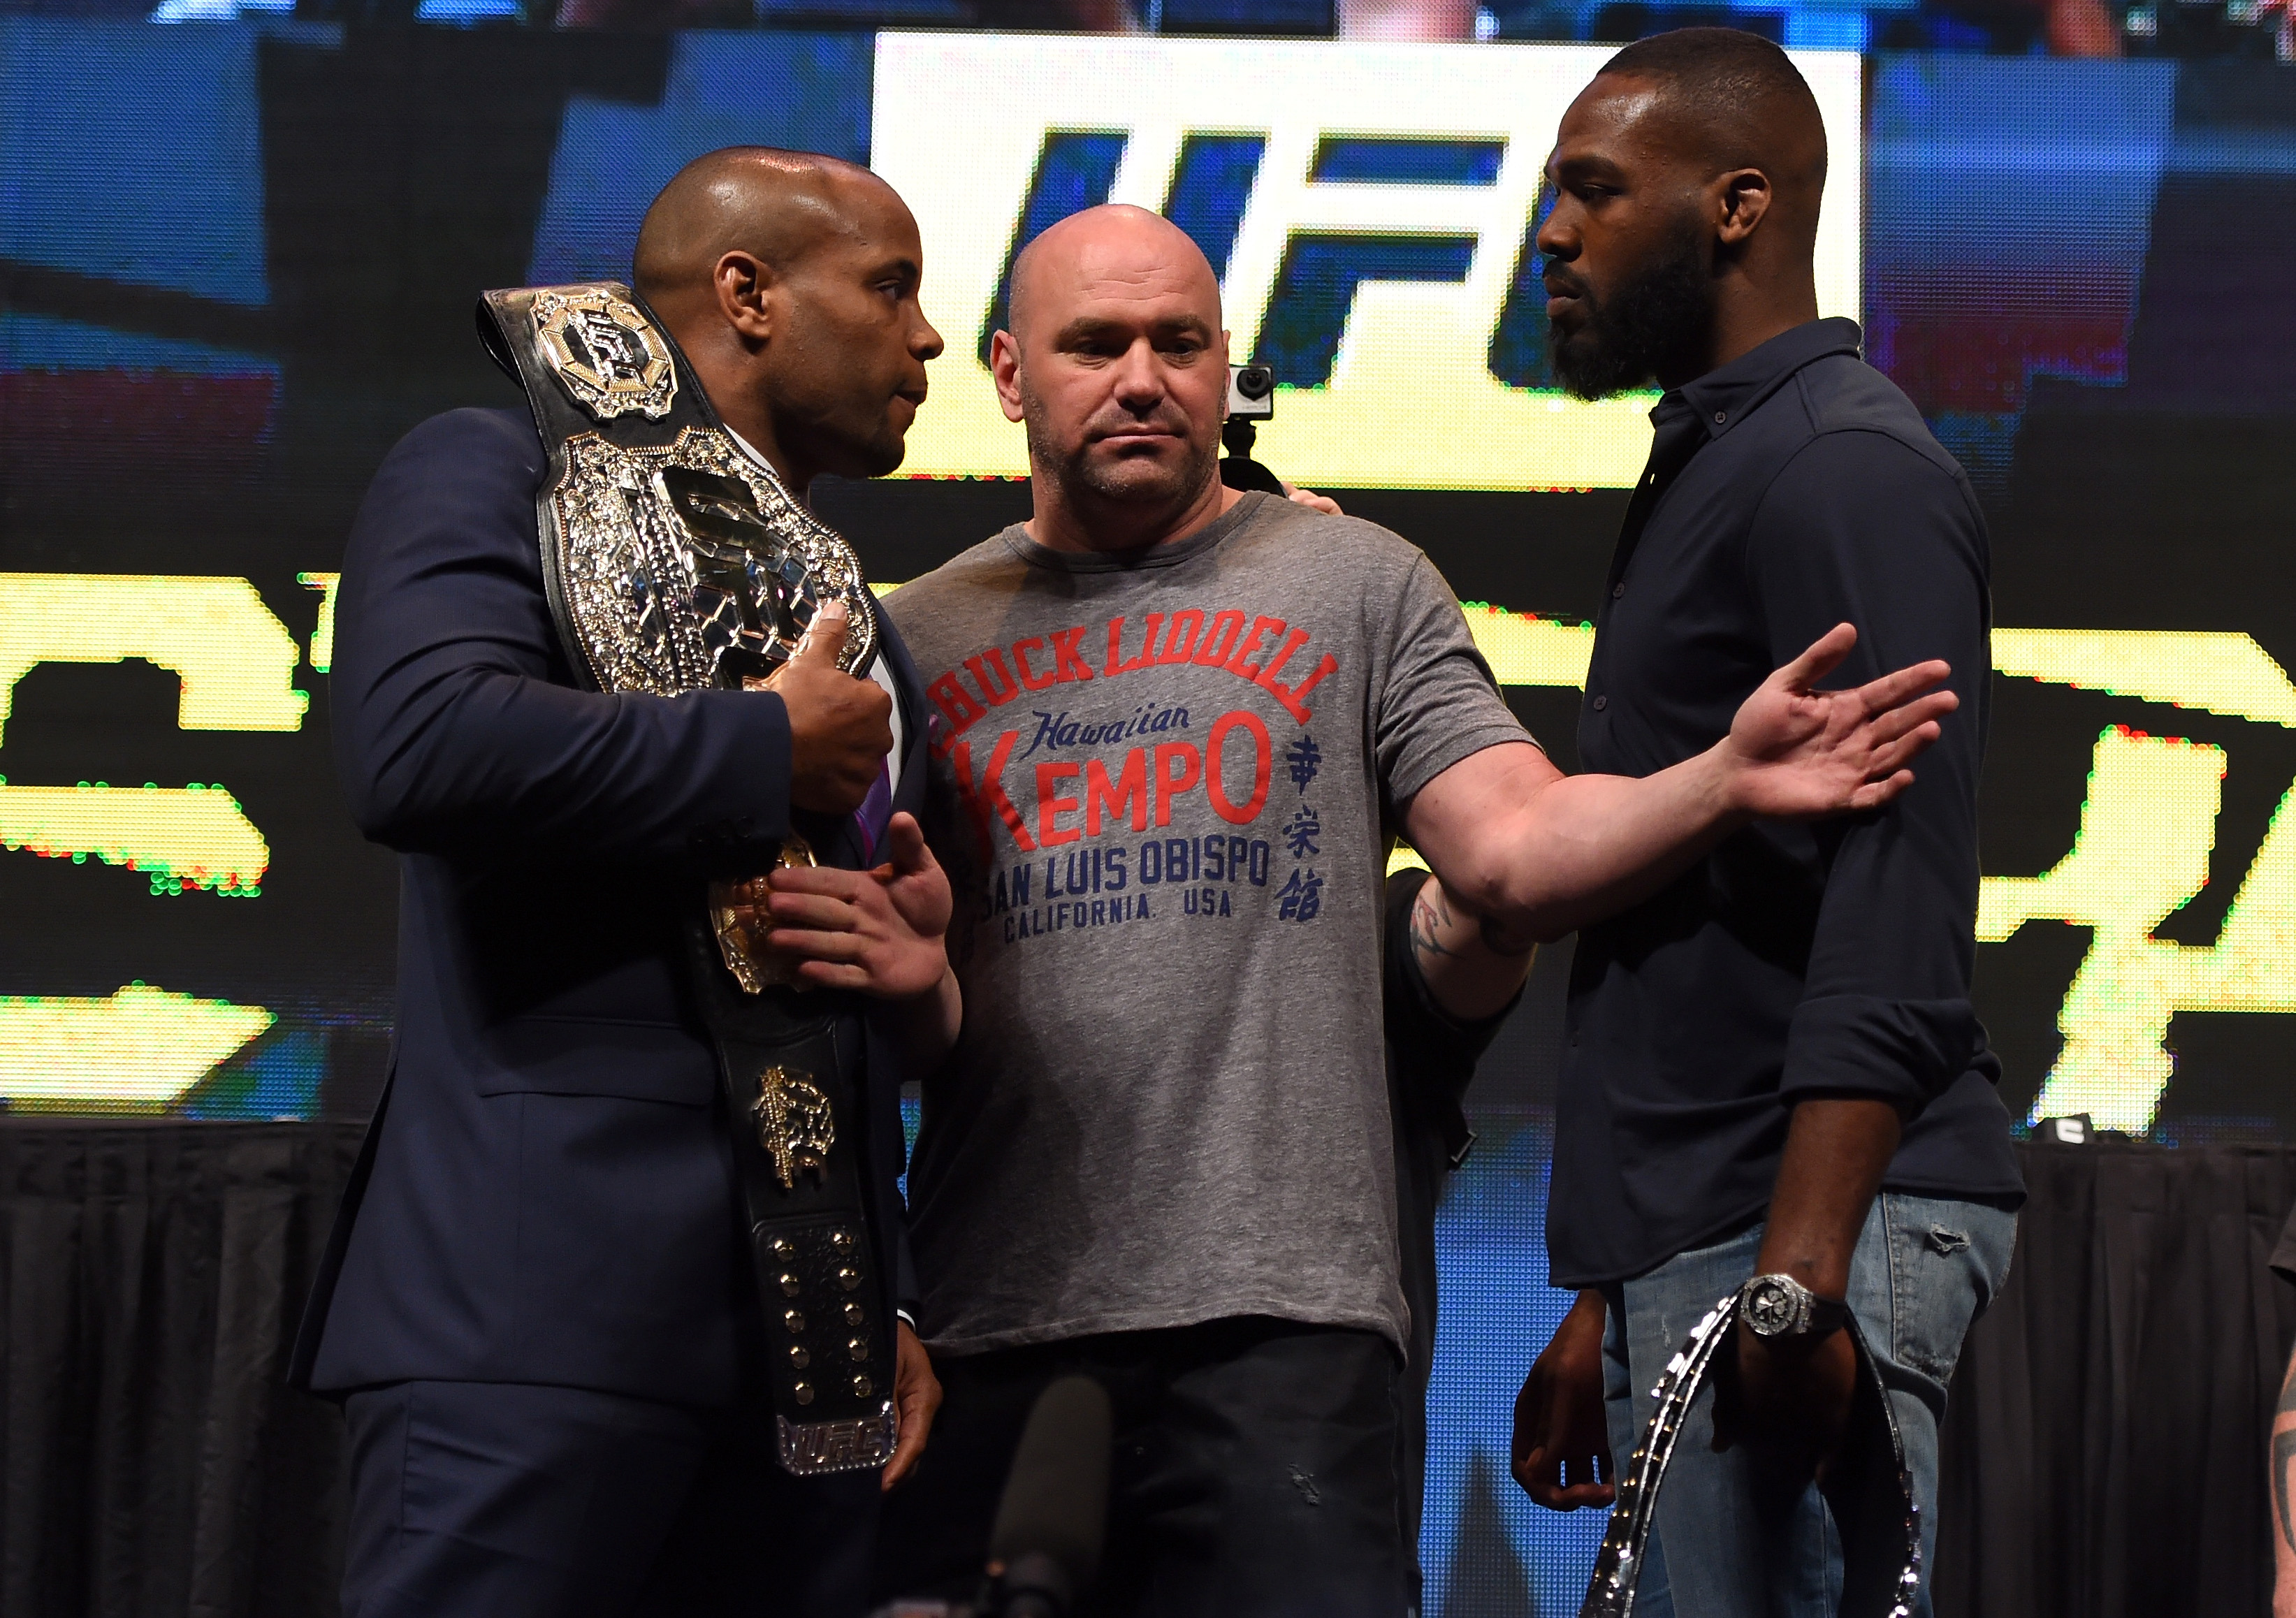 UFC president holds Daniel Cormier and Jon Jones back from one another during a media event. (Getty)